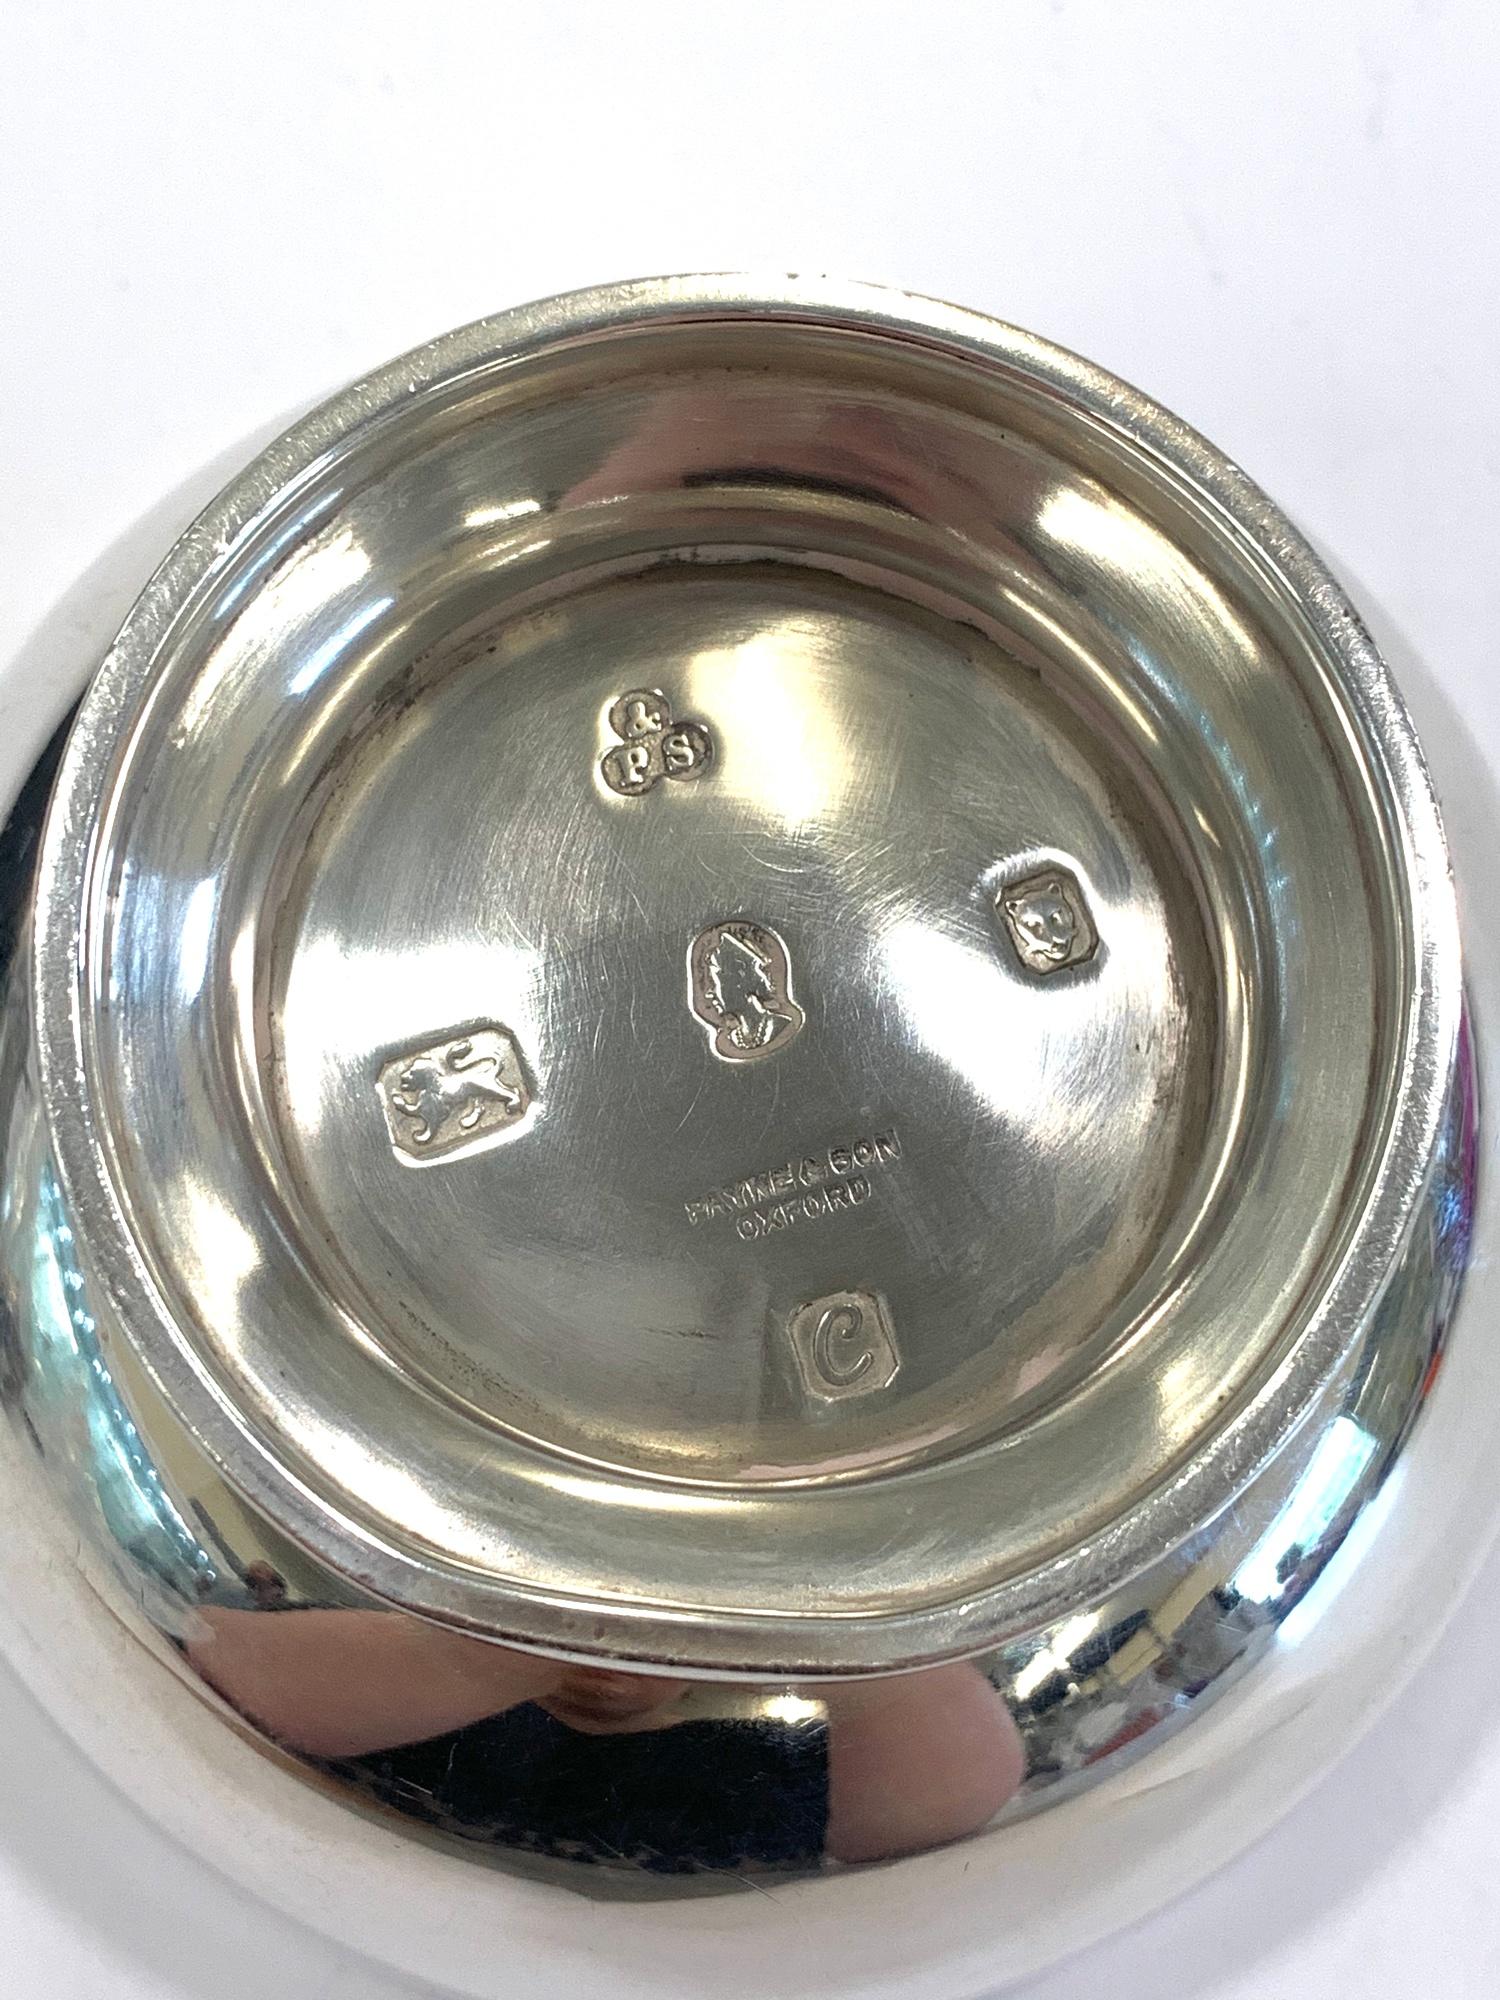 Vintage Hallmarked 1977 London silver bowl by payne & Son Oxford Diameter - 10cm In vintage - Image 2 of 3